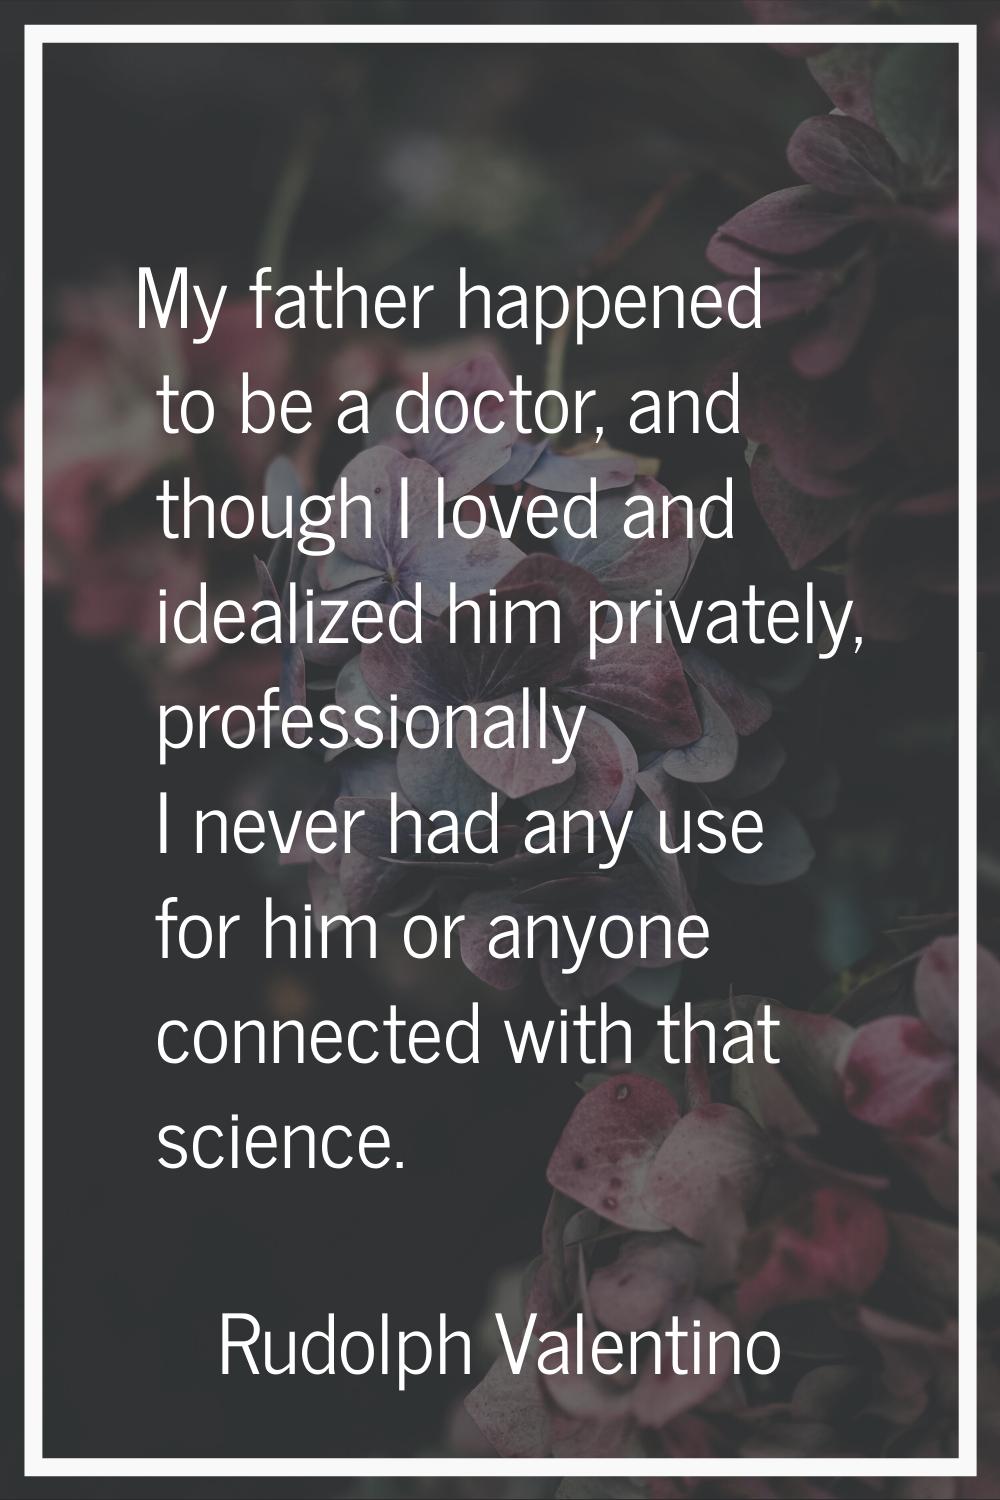 My father happened to be a doctor, and though I loved and idealized him privately, professionally I